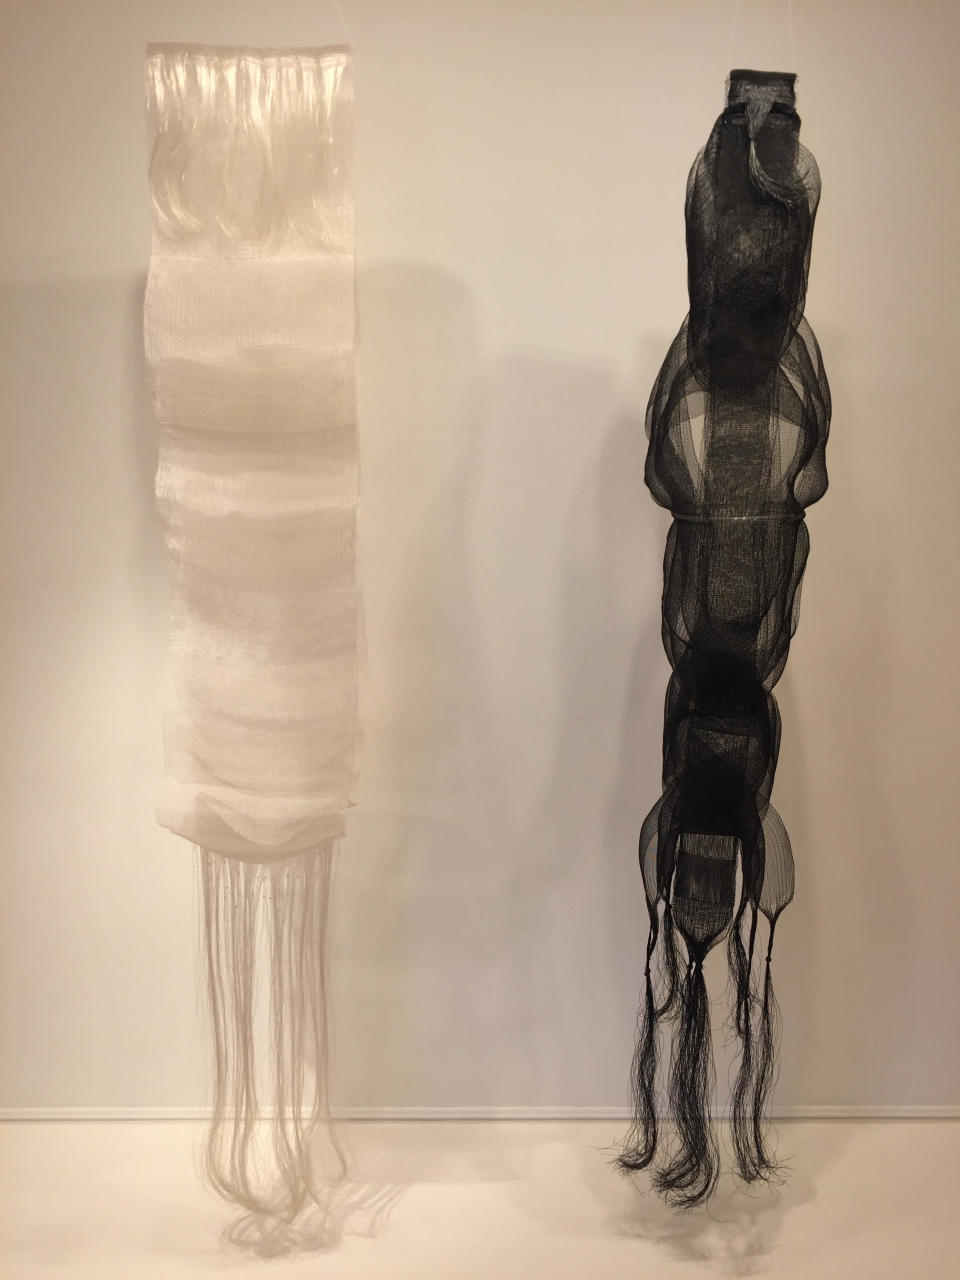 This photo taken on Dec. 2, 2016 shows nylon monofilament woven wall hangings "Ogawa II" (1969 - white) and "Nagare I" (1967 - black) by Berkeley, Calif., based 90-year-old fiber artist and weaver Kay Sekimachi. The pieces are part of the "Kay Sekimachi: Simple Complexity" exhibit the Craft and Folk Art Museum in Los Angeles, chronicling Sekimachi's decades-long career. The exhibit opened on Sept. 25, 2016, and runs through Jan. 8, 2017. (Solvej Schou via AP)